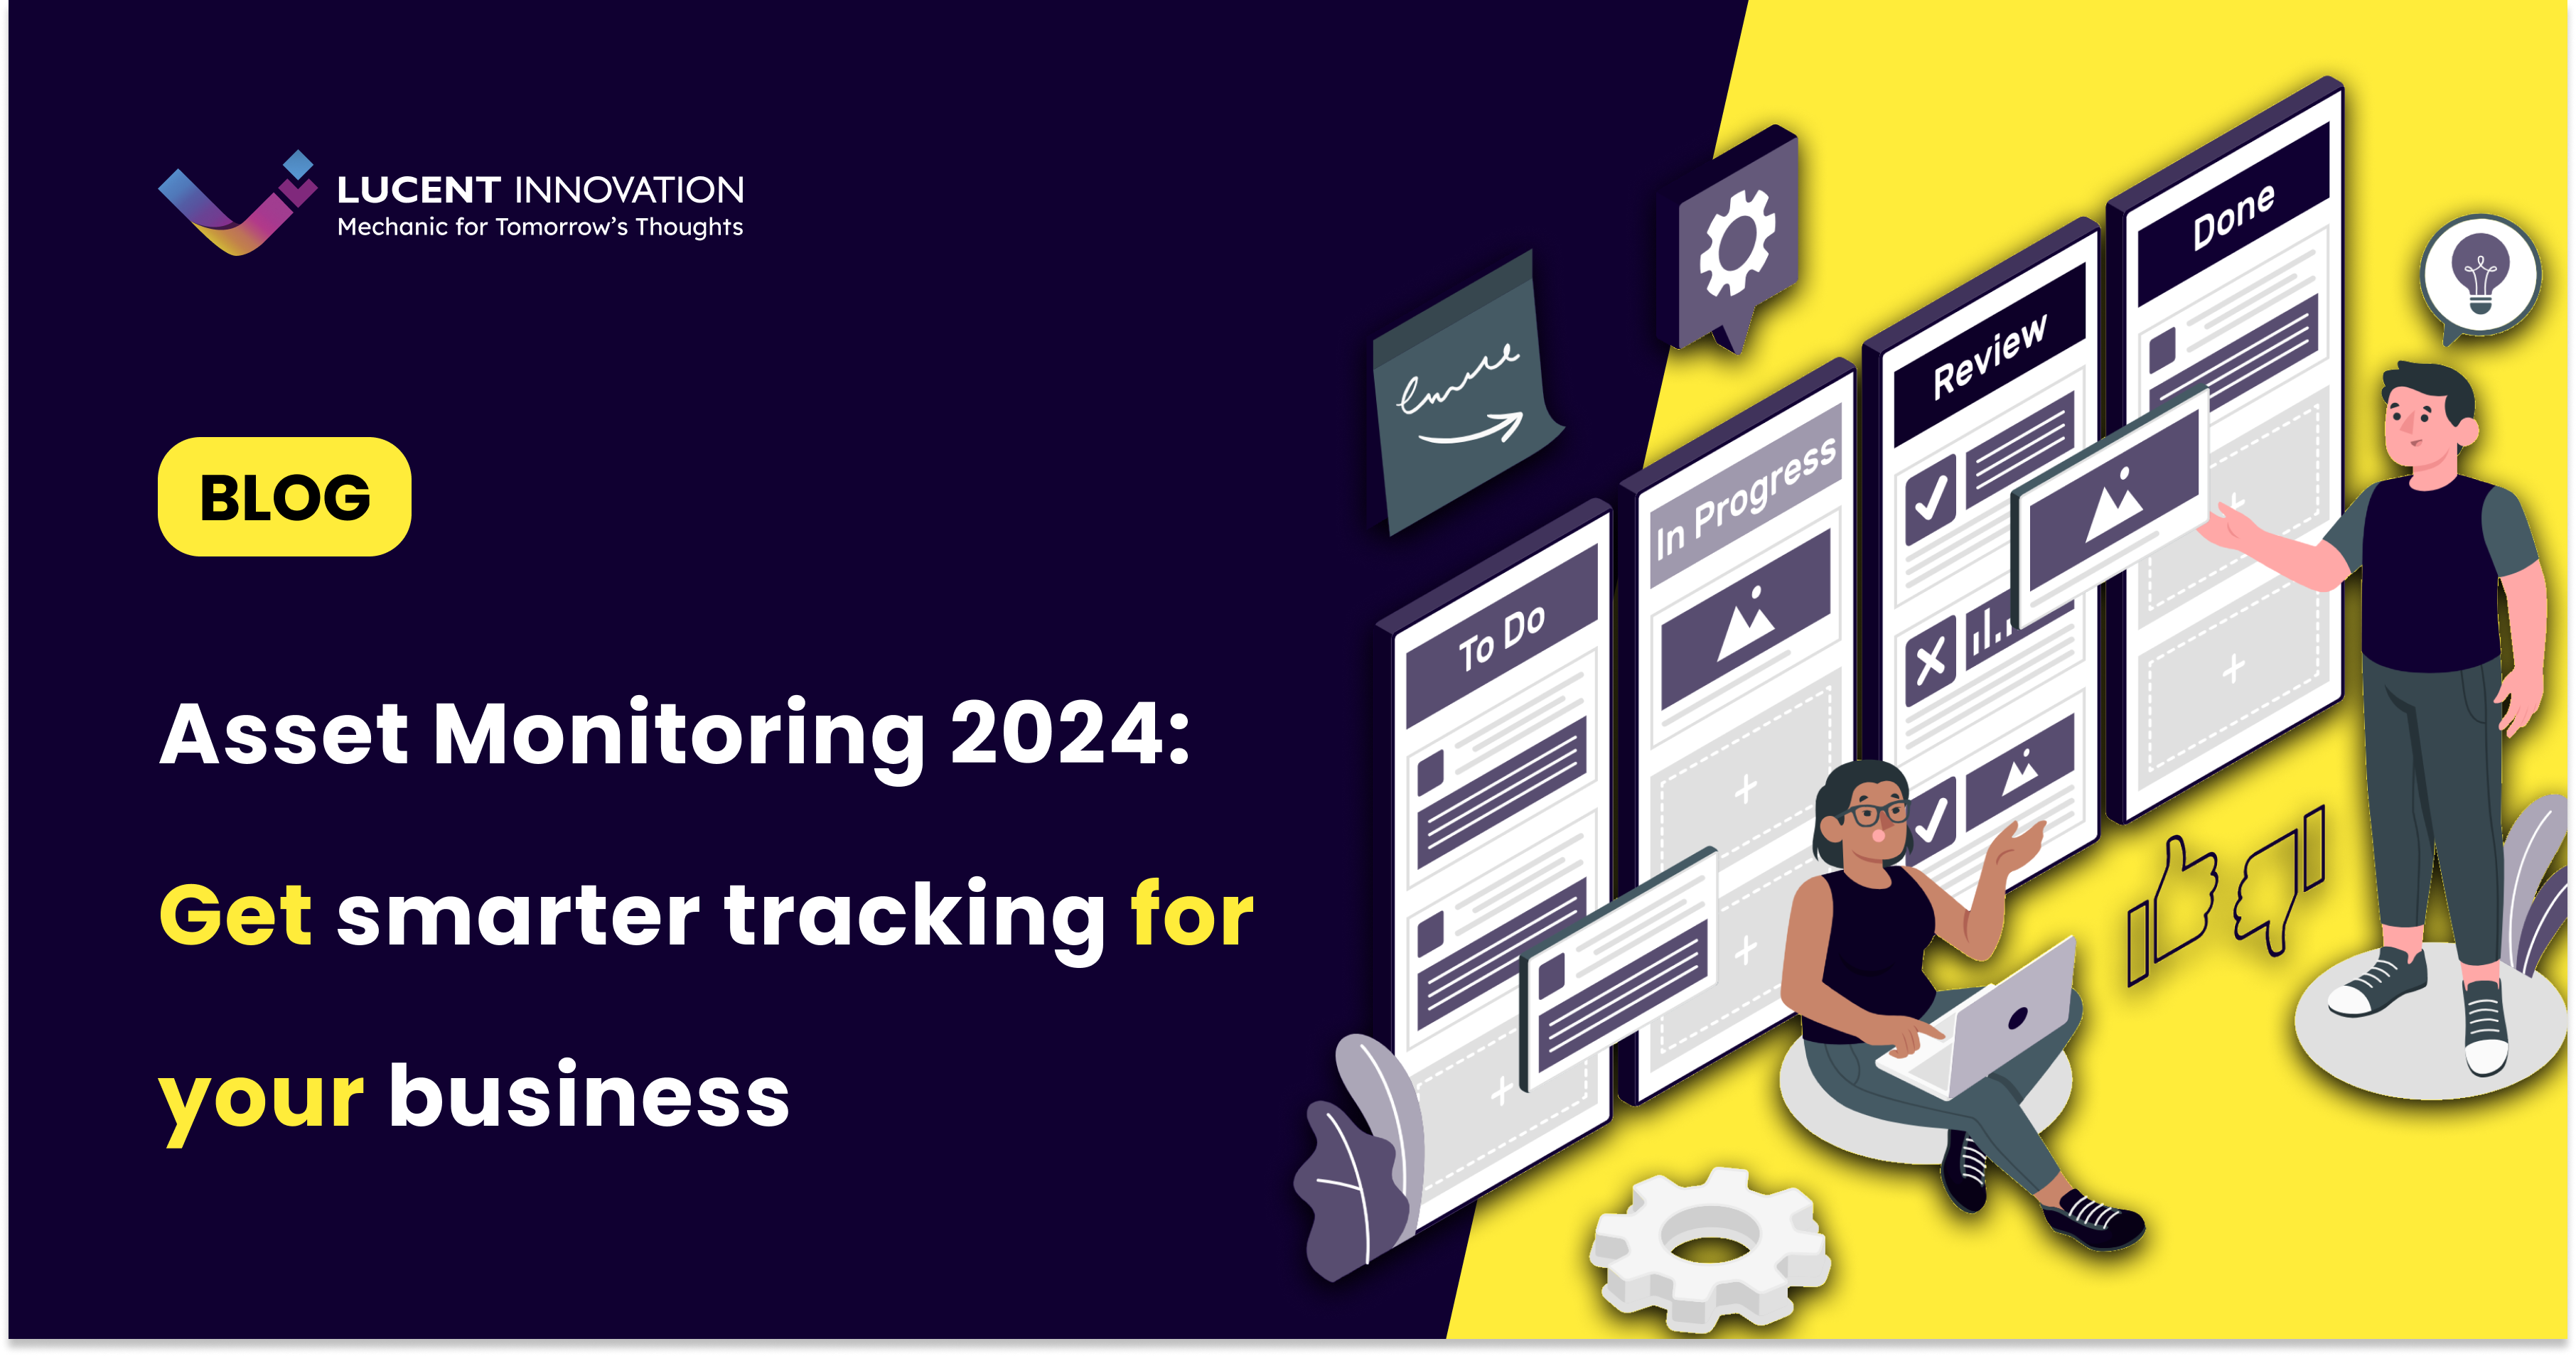 Efficient Asset Monitoring: Enhance Your Business with Smarter Tracking in 2024